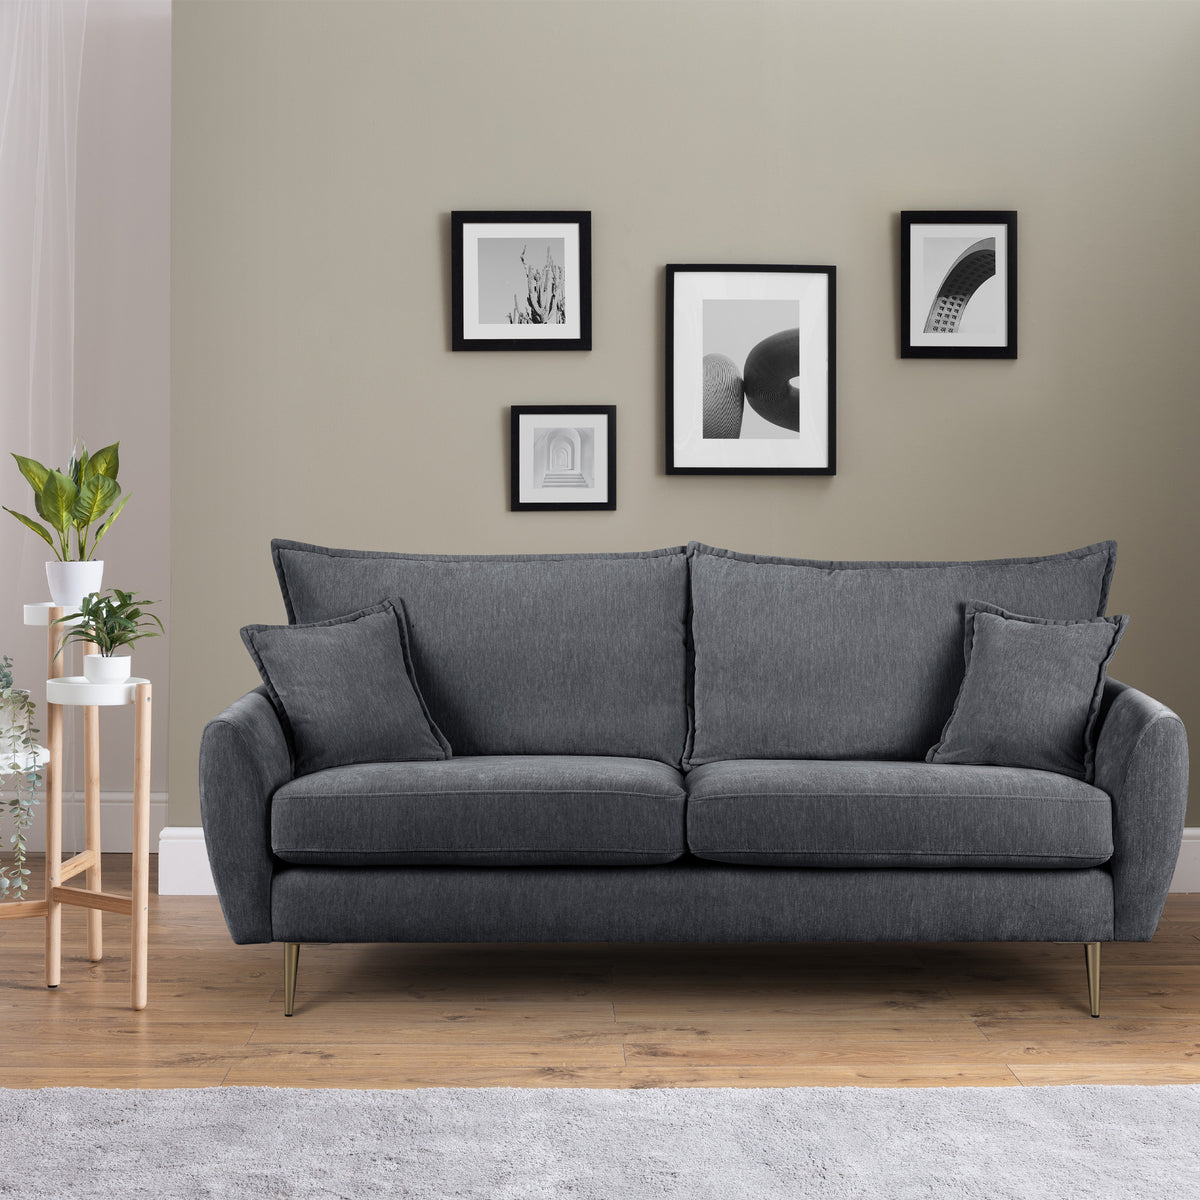 Evelyn Charcoal Grey 3 Seater Sofa for living room